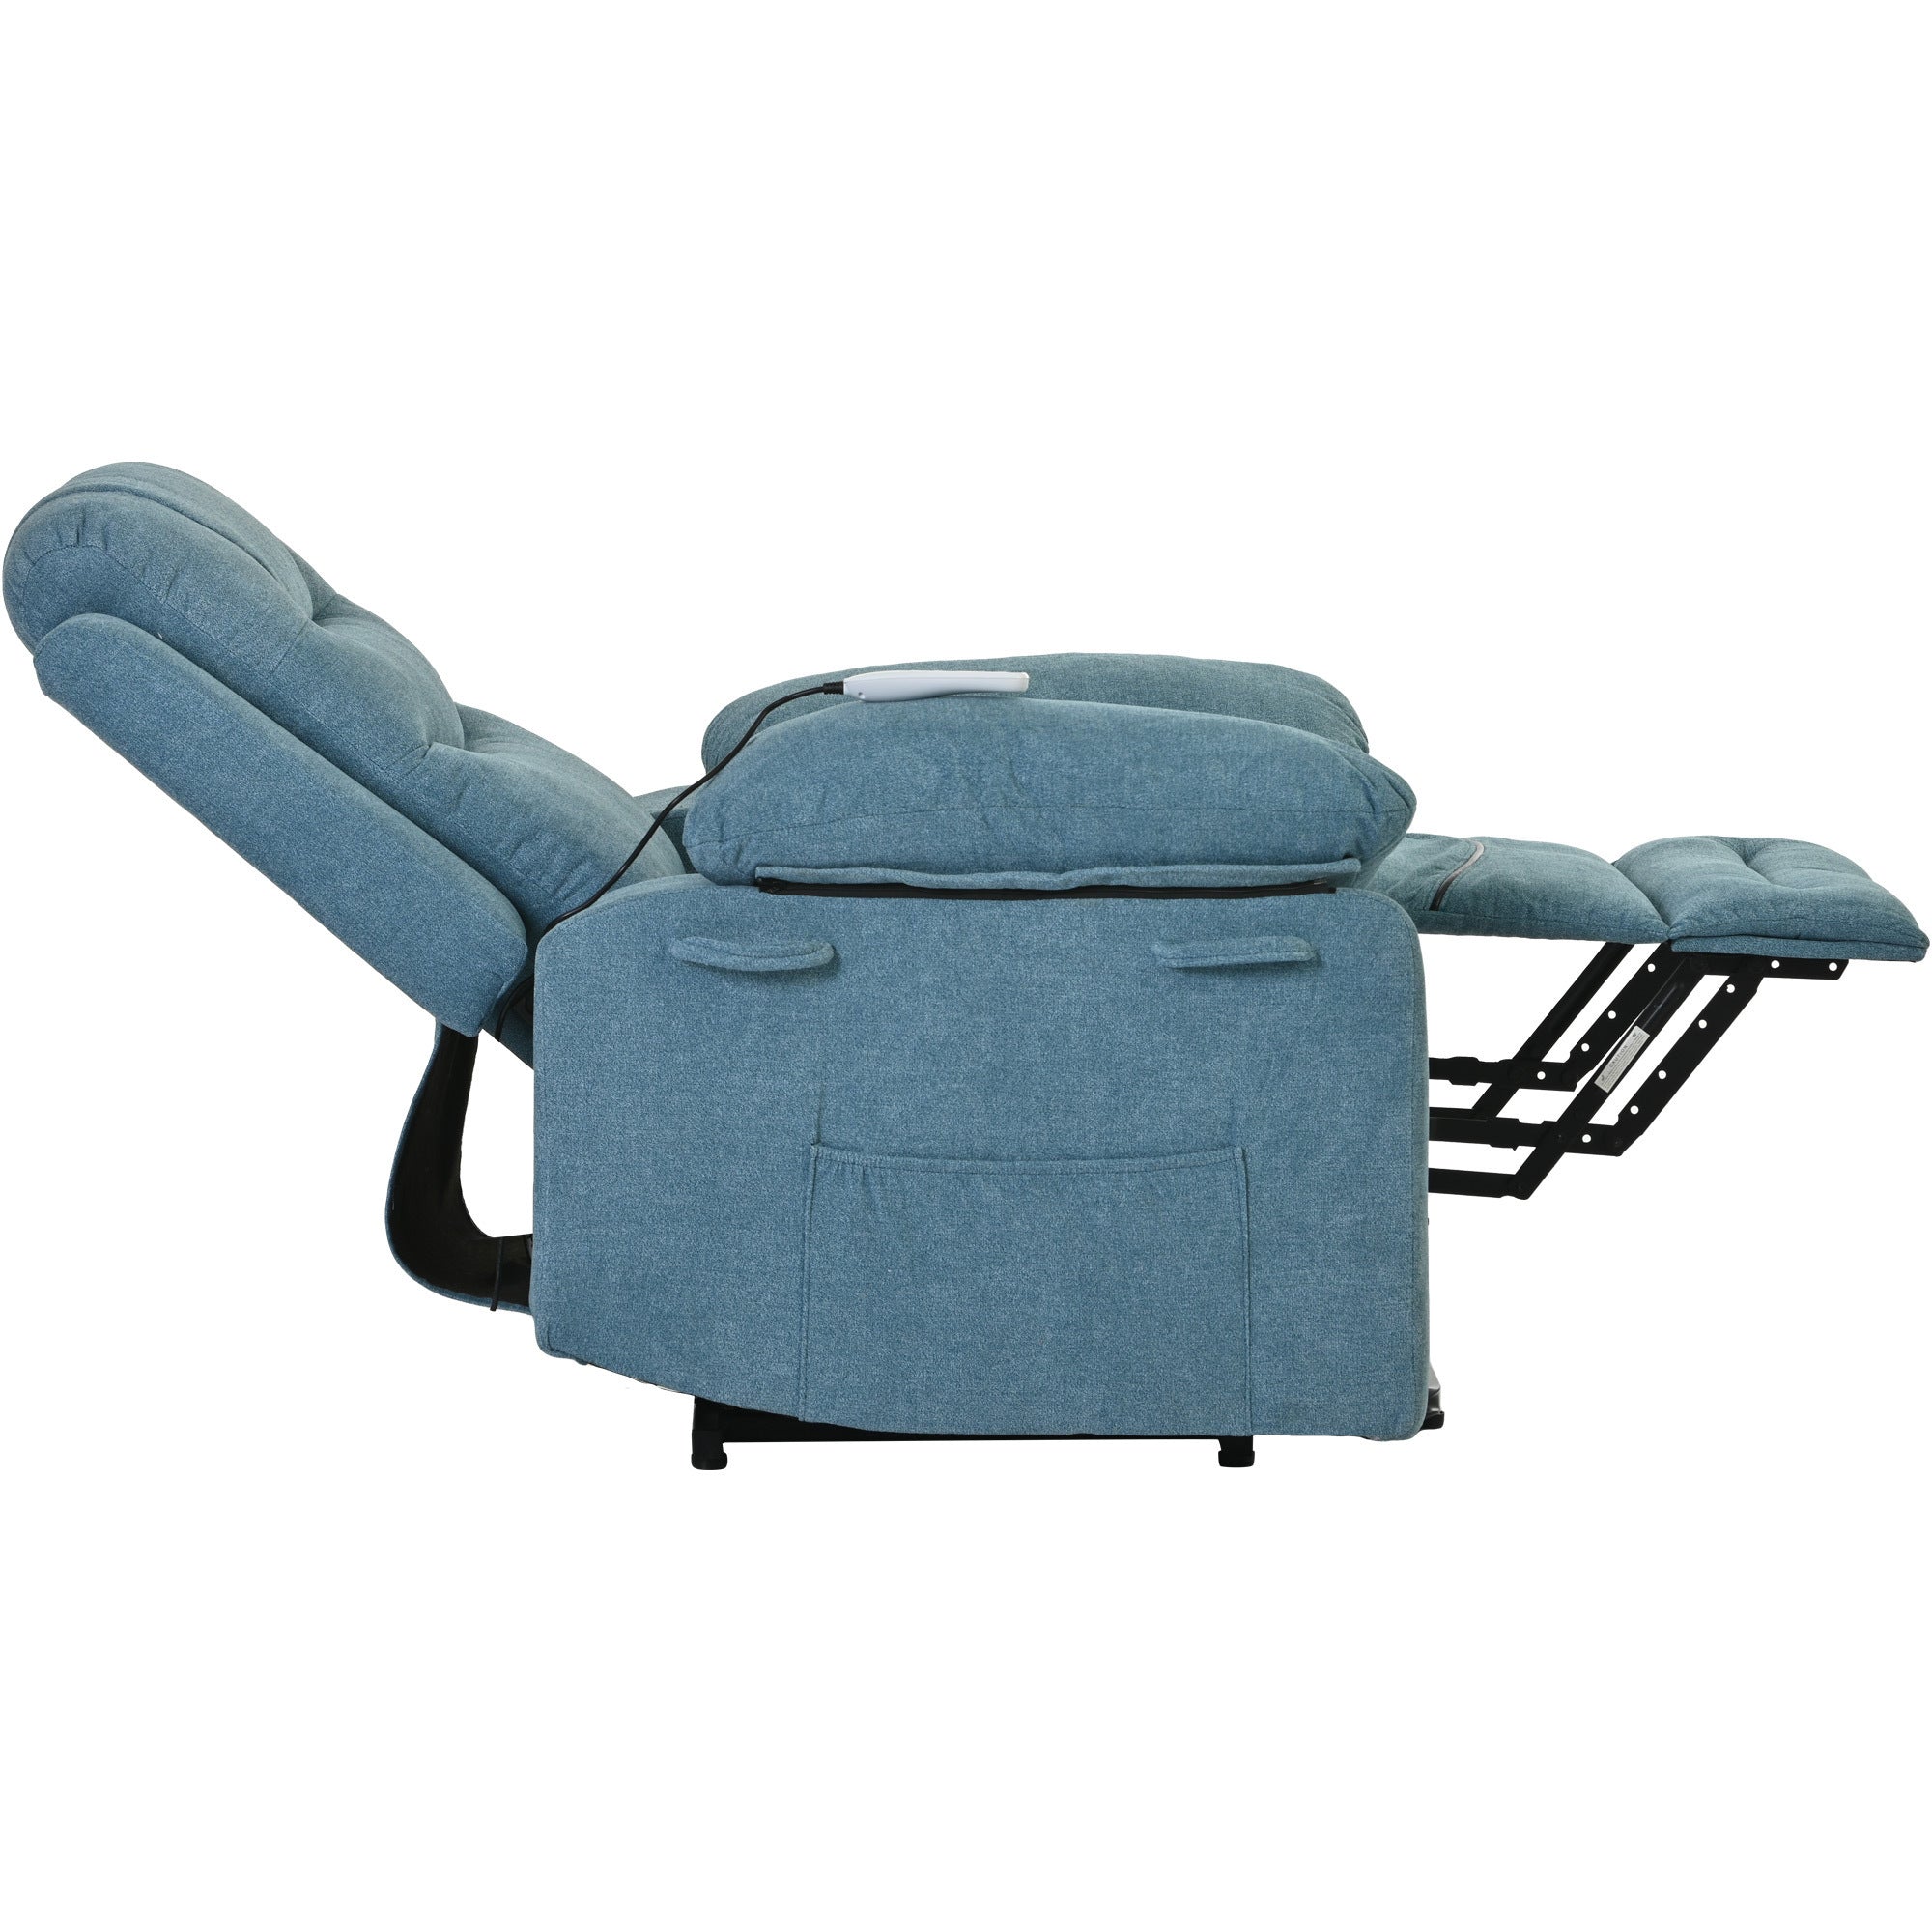 Blue Power Lift Chair with head and footrest extended side profile